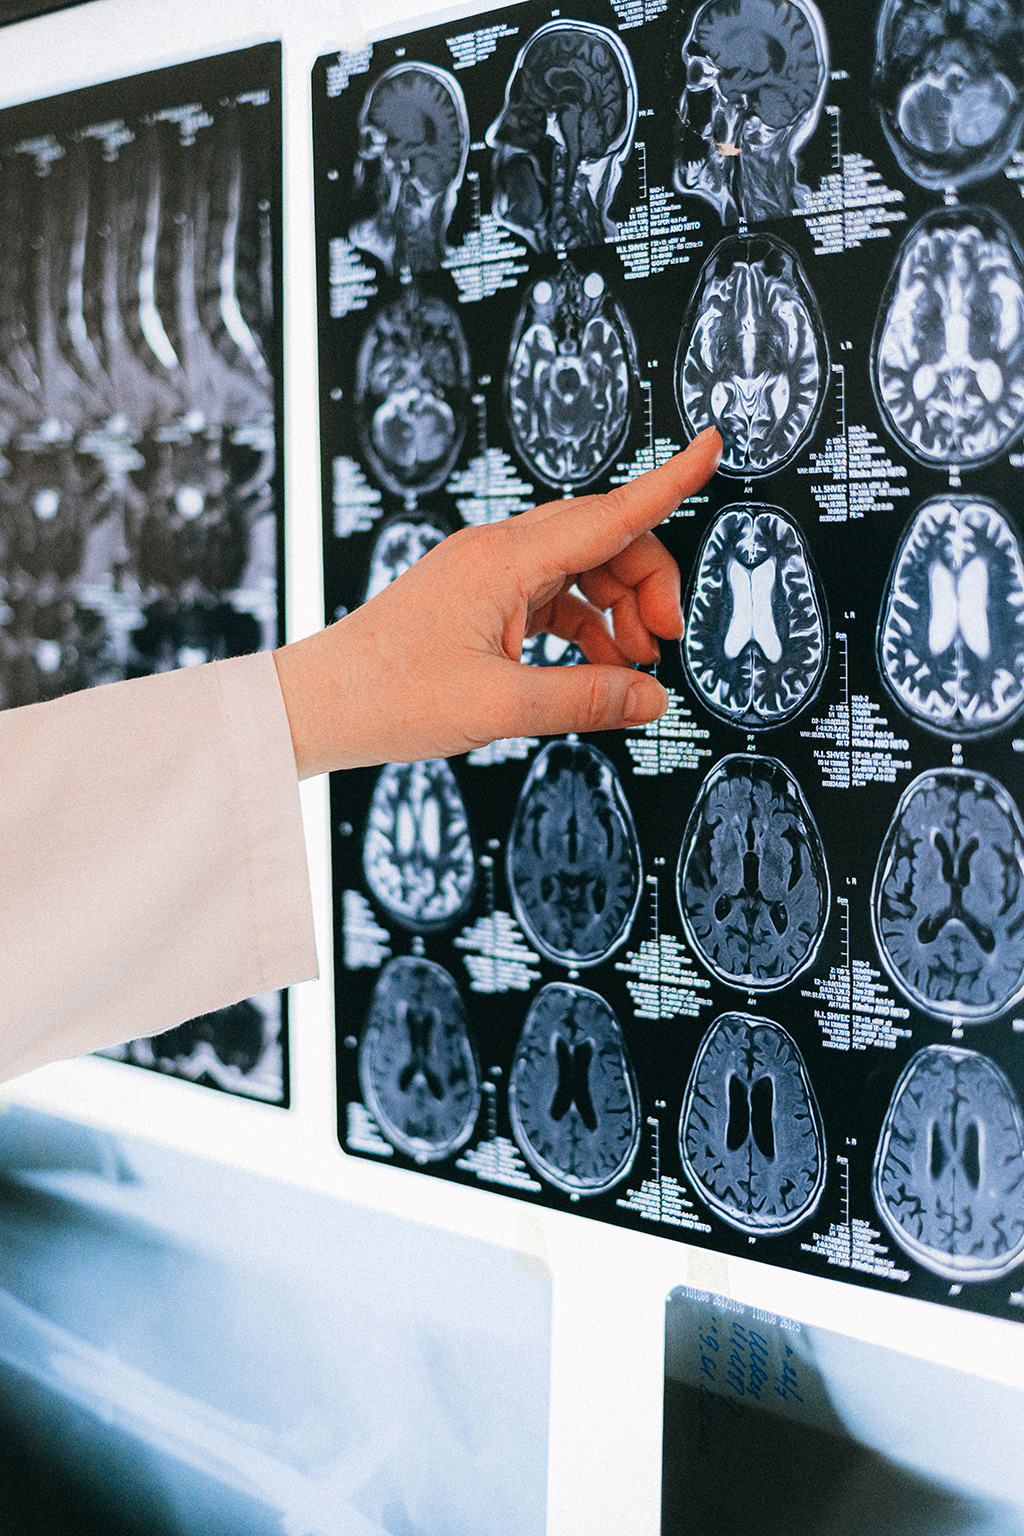 Image: Researchers are designing a customized device to improve brain aneurysm treatment (Photo courtesy of Pexels)